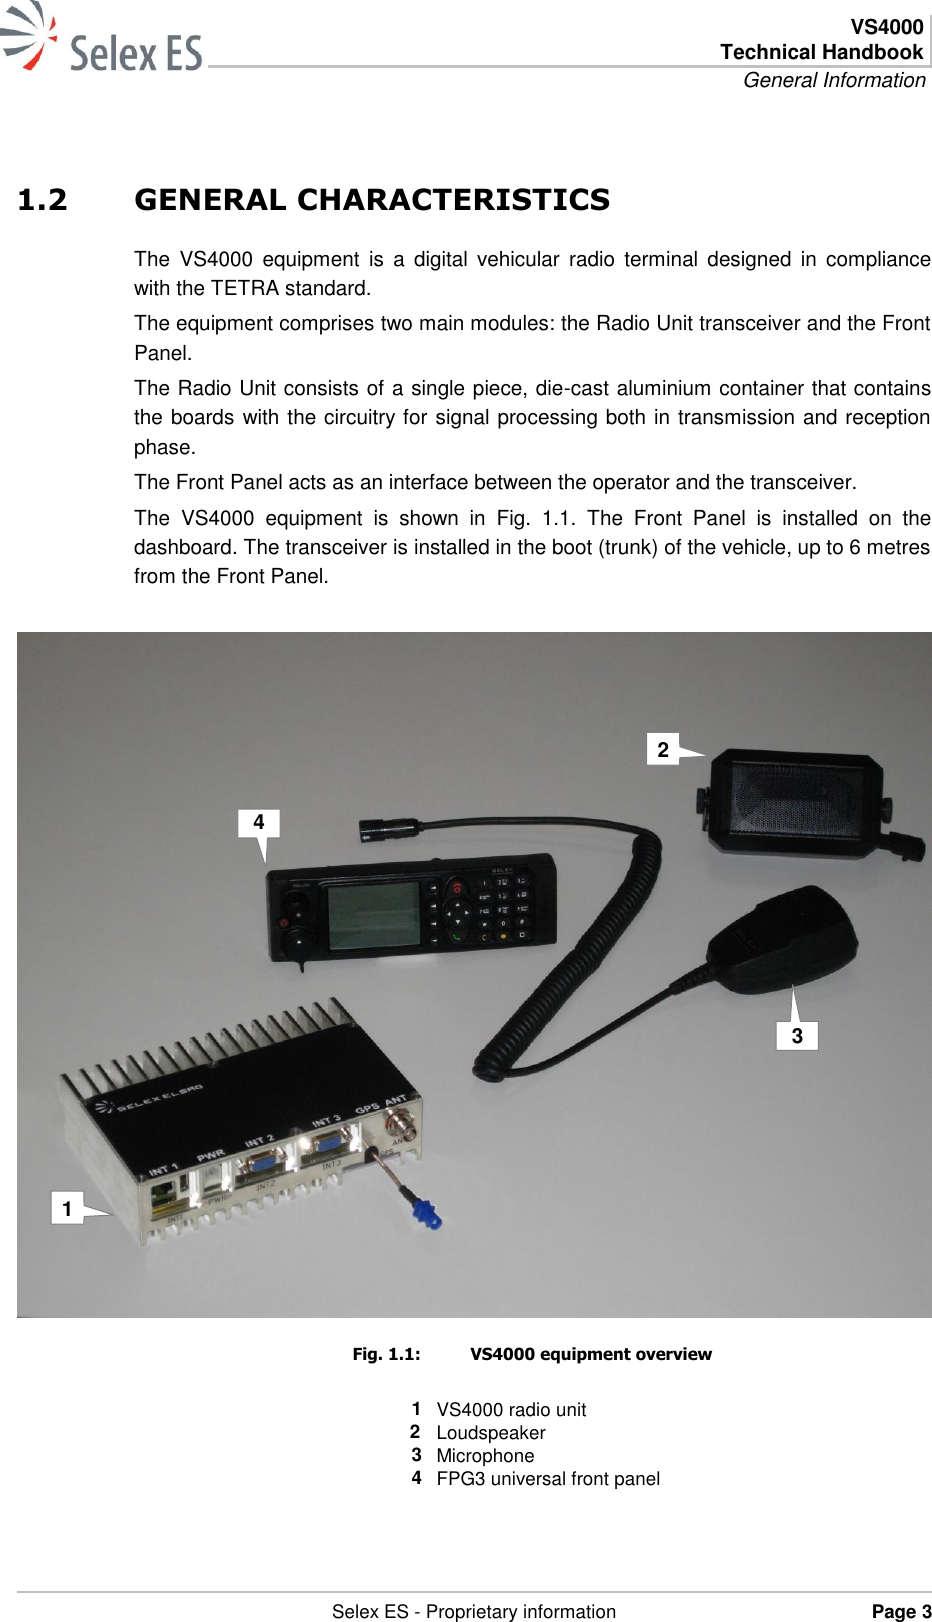  VS4000 Technical Handbook General Information   Selex ES - Proprietary information Page 3  1.2 GENERAL CHARACTERISTICS The  VS4000  equipment  is  a  digital  vehicular  radio  terminal  designed  in  compliance with the TETRA standard. The equipment comprises two main modules: the Radio Unit transceiver and the Front Panel. The Radio Unit consists of a single piece, die-cast aluminium container that contains the boards with the circuitry for signal processing both in transmission and reception phase. The Front Panel acts as an interface between the operator and the transceiver. The  VS4000  equipment  is  shown  in  Fig.  1.1.  The  Front  Panel  is  installed  on  the dashboard. The transceiver is installed in the boot (trunk) of the vehicle, up to 6 metres from the Front Panel.   Fig. 1.1:  VS4000 equipment overview  1 VS4000 radio unit   2 Loudspeaker 3 Microphone 4 FPG3 universal front panel  2 3 4 1 